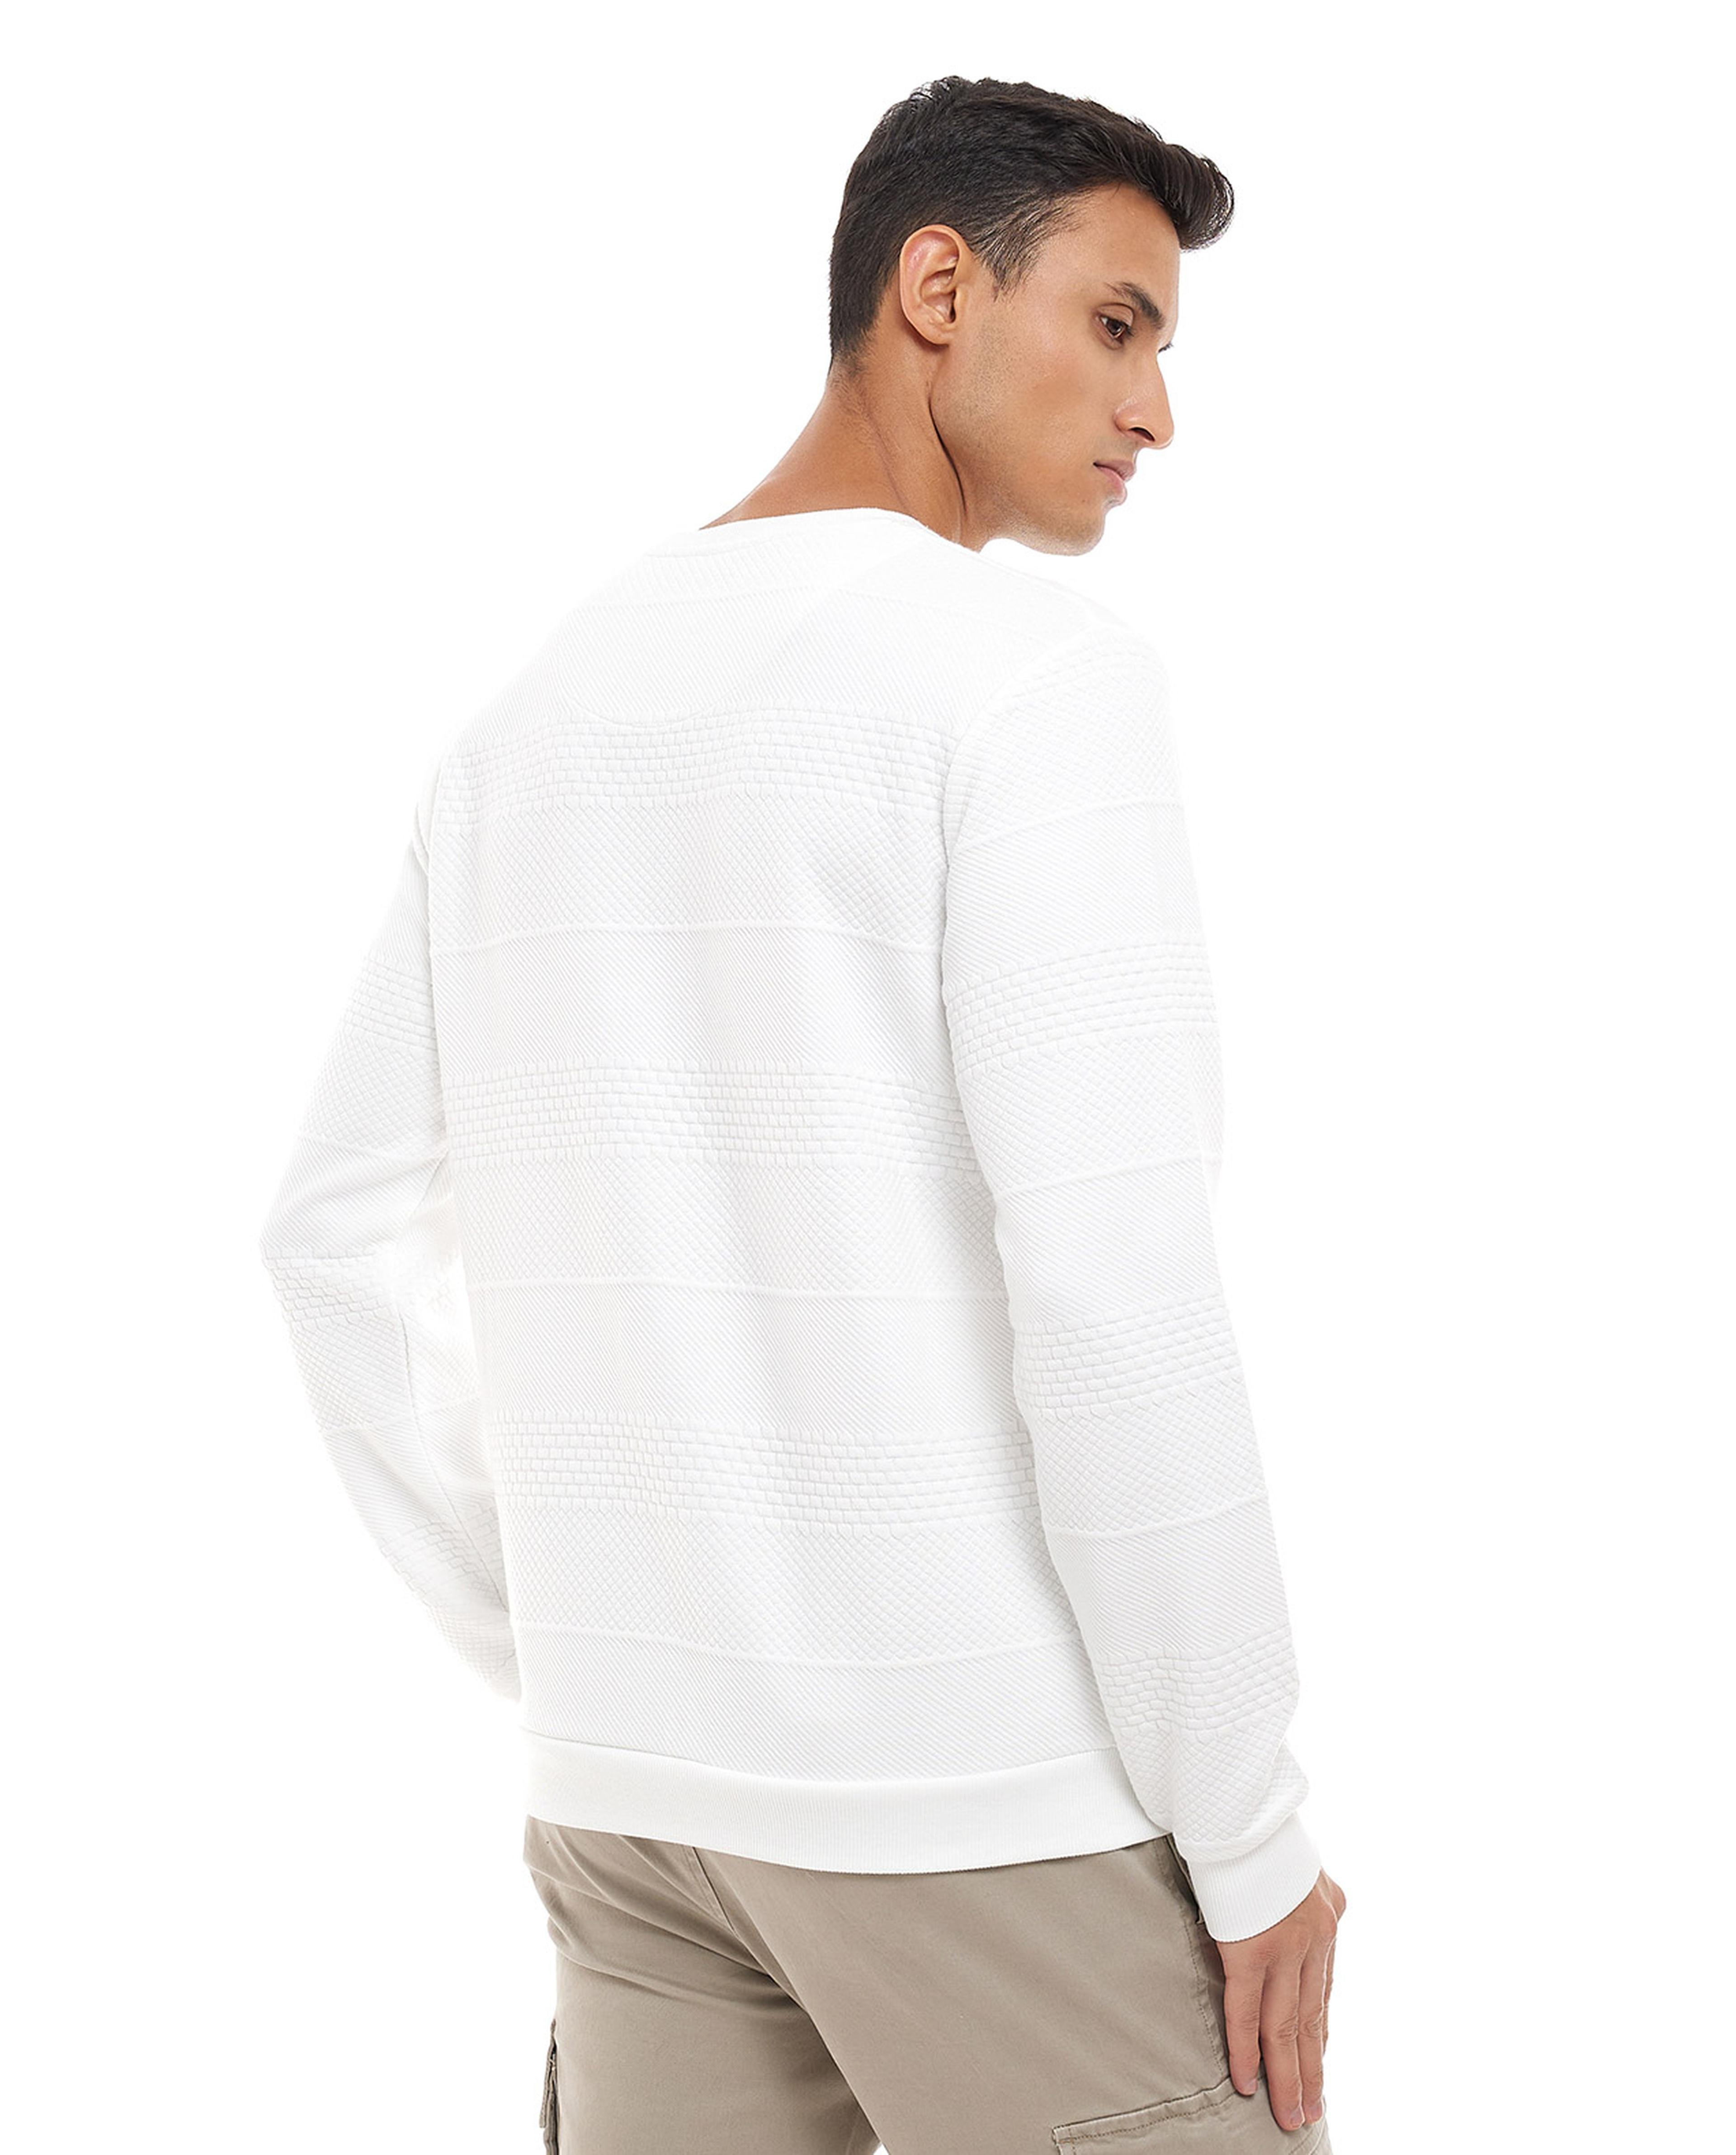 Knitted Sweatshirt with Crew Neck and Long Sleeves